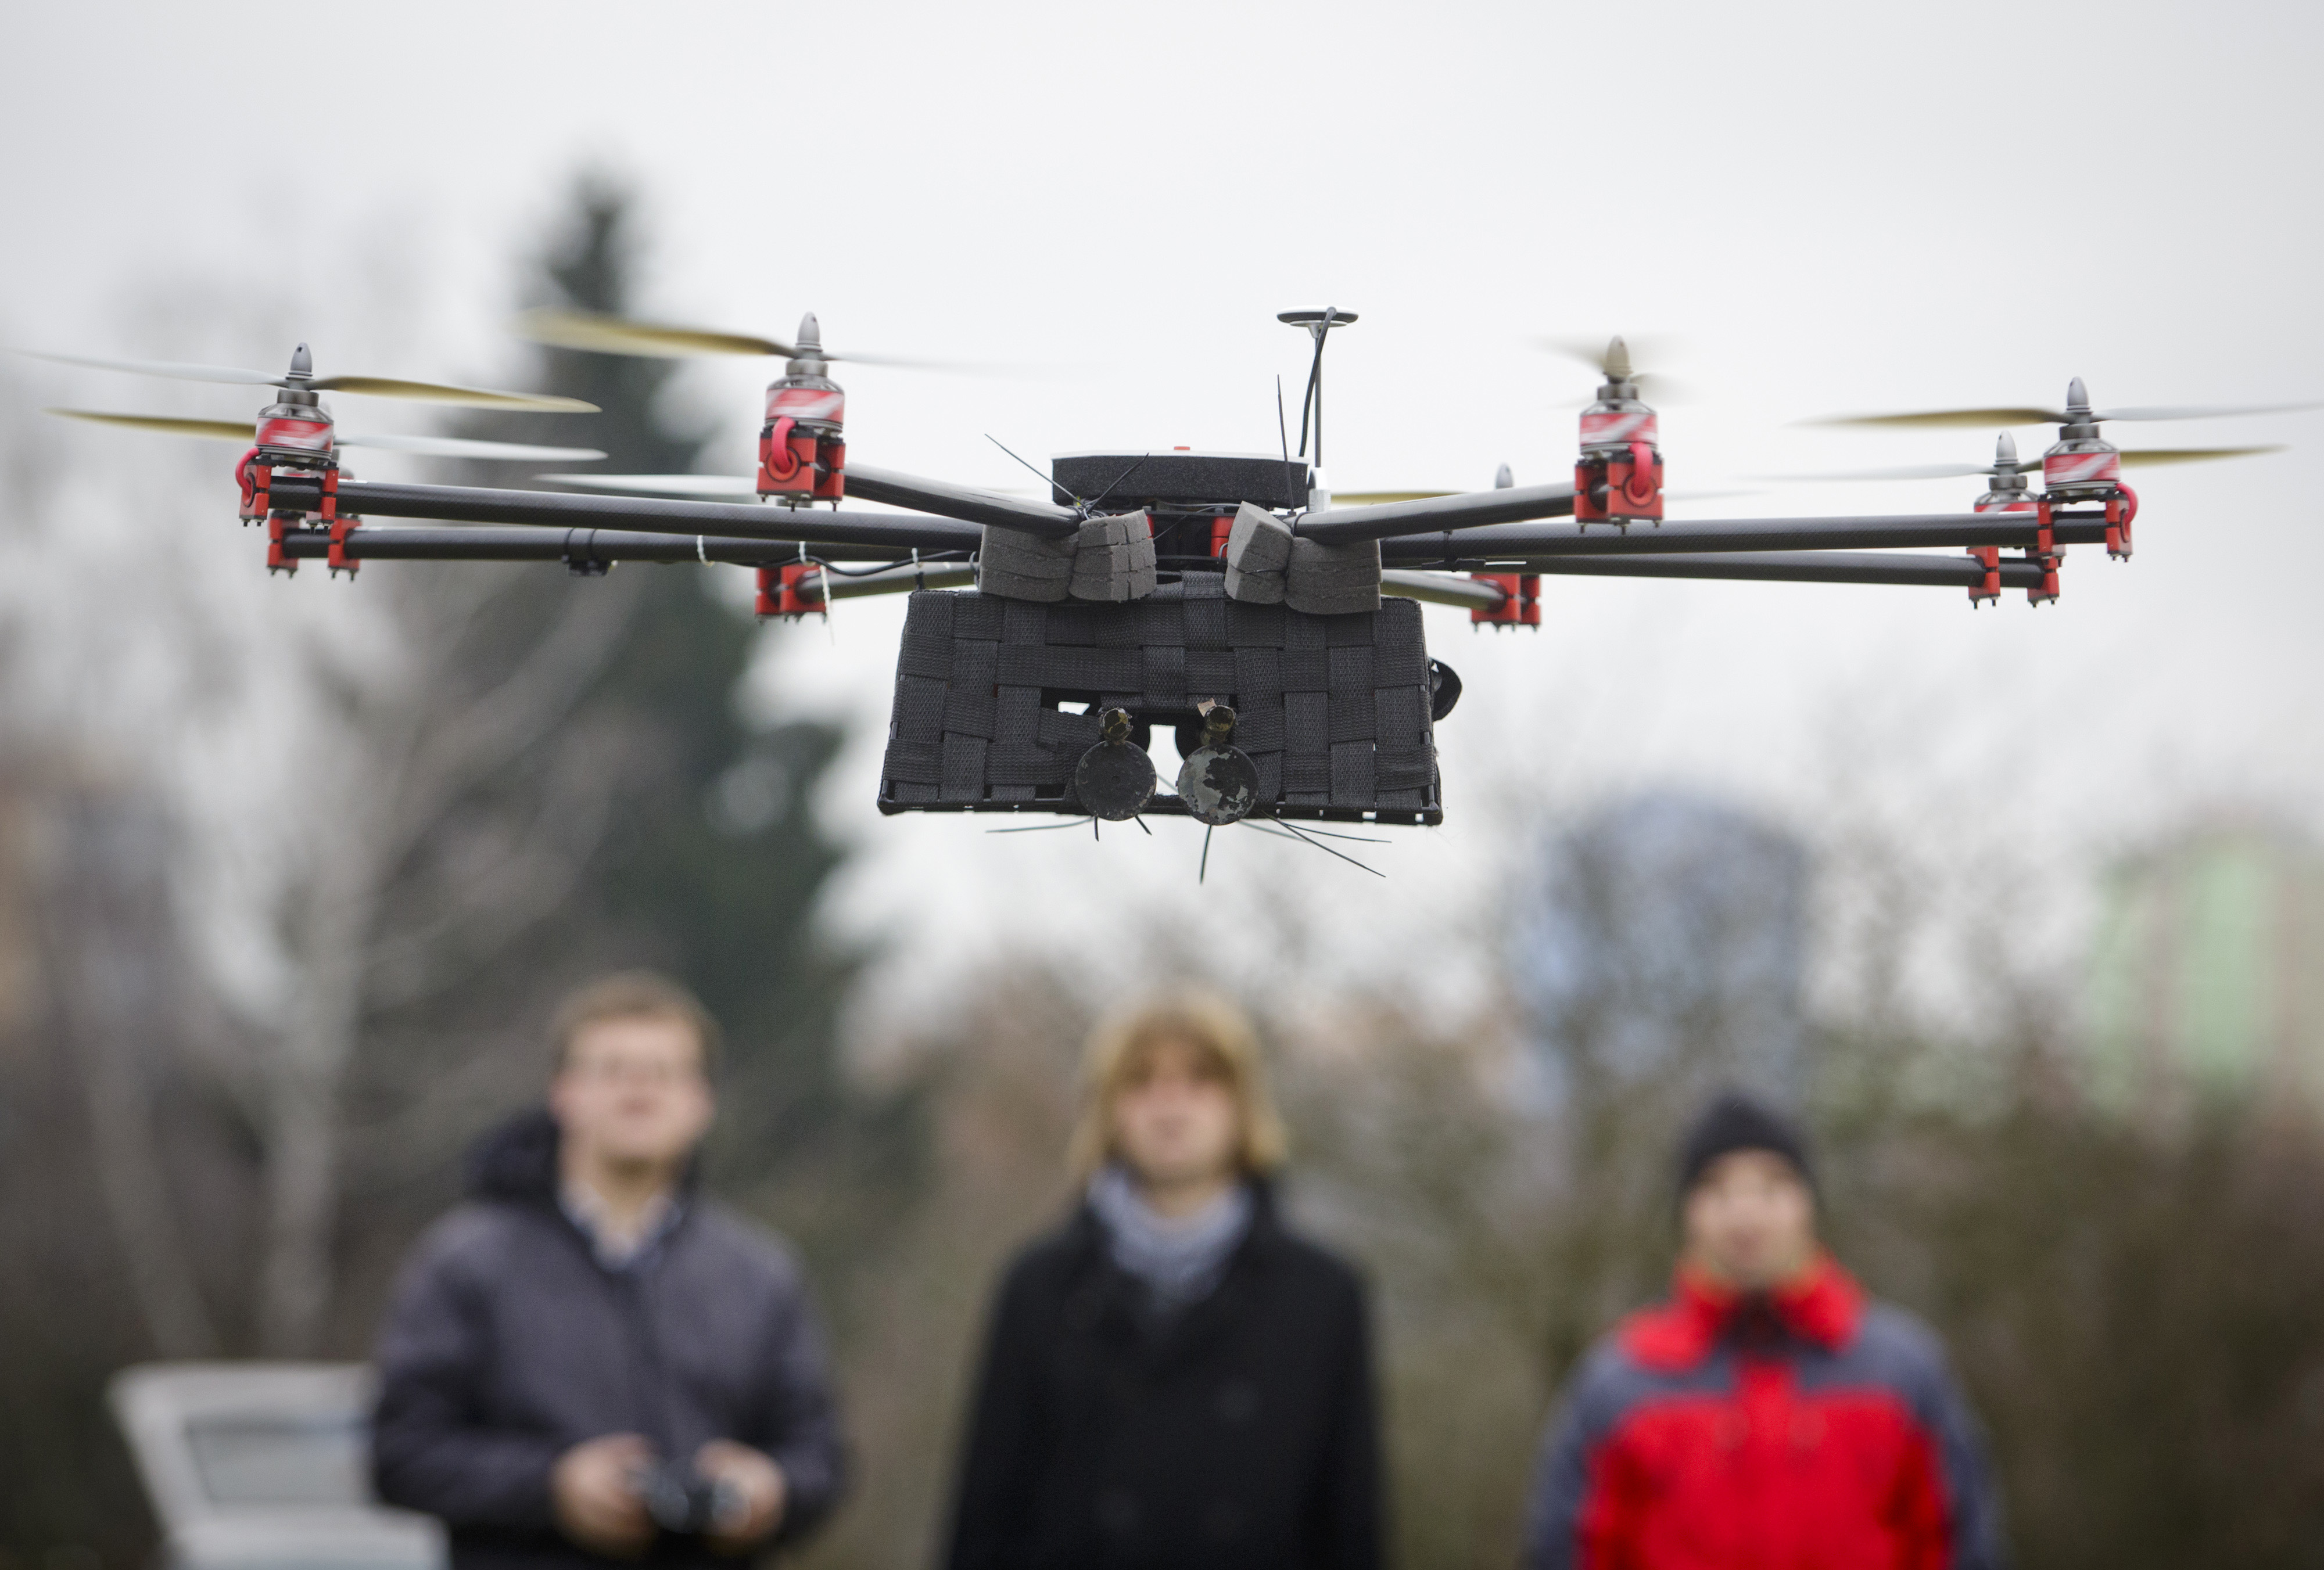 Drone Manufacture At Steadidrone Plant As Companies Explore Commercial Usage